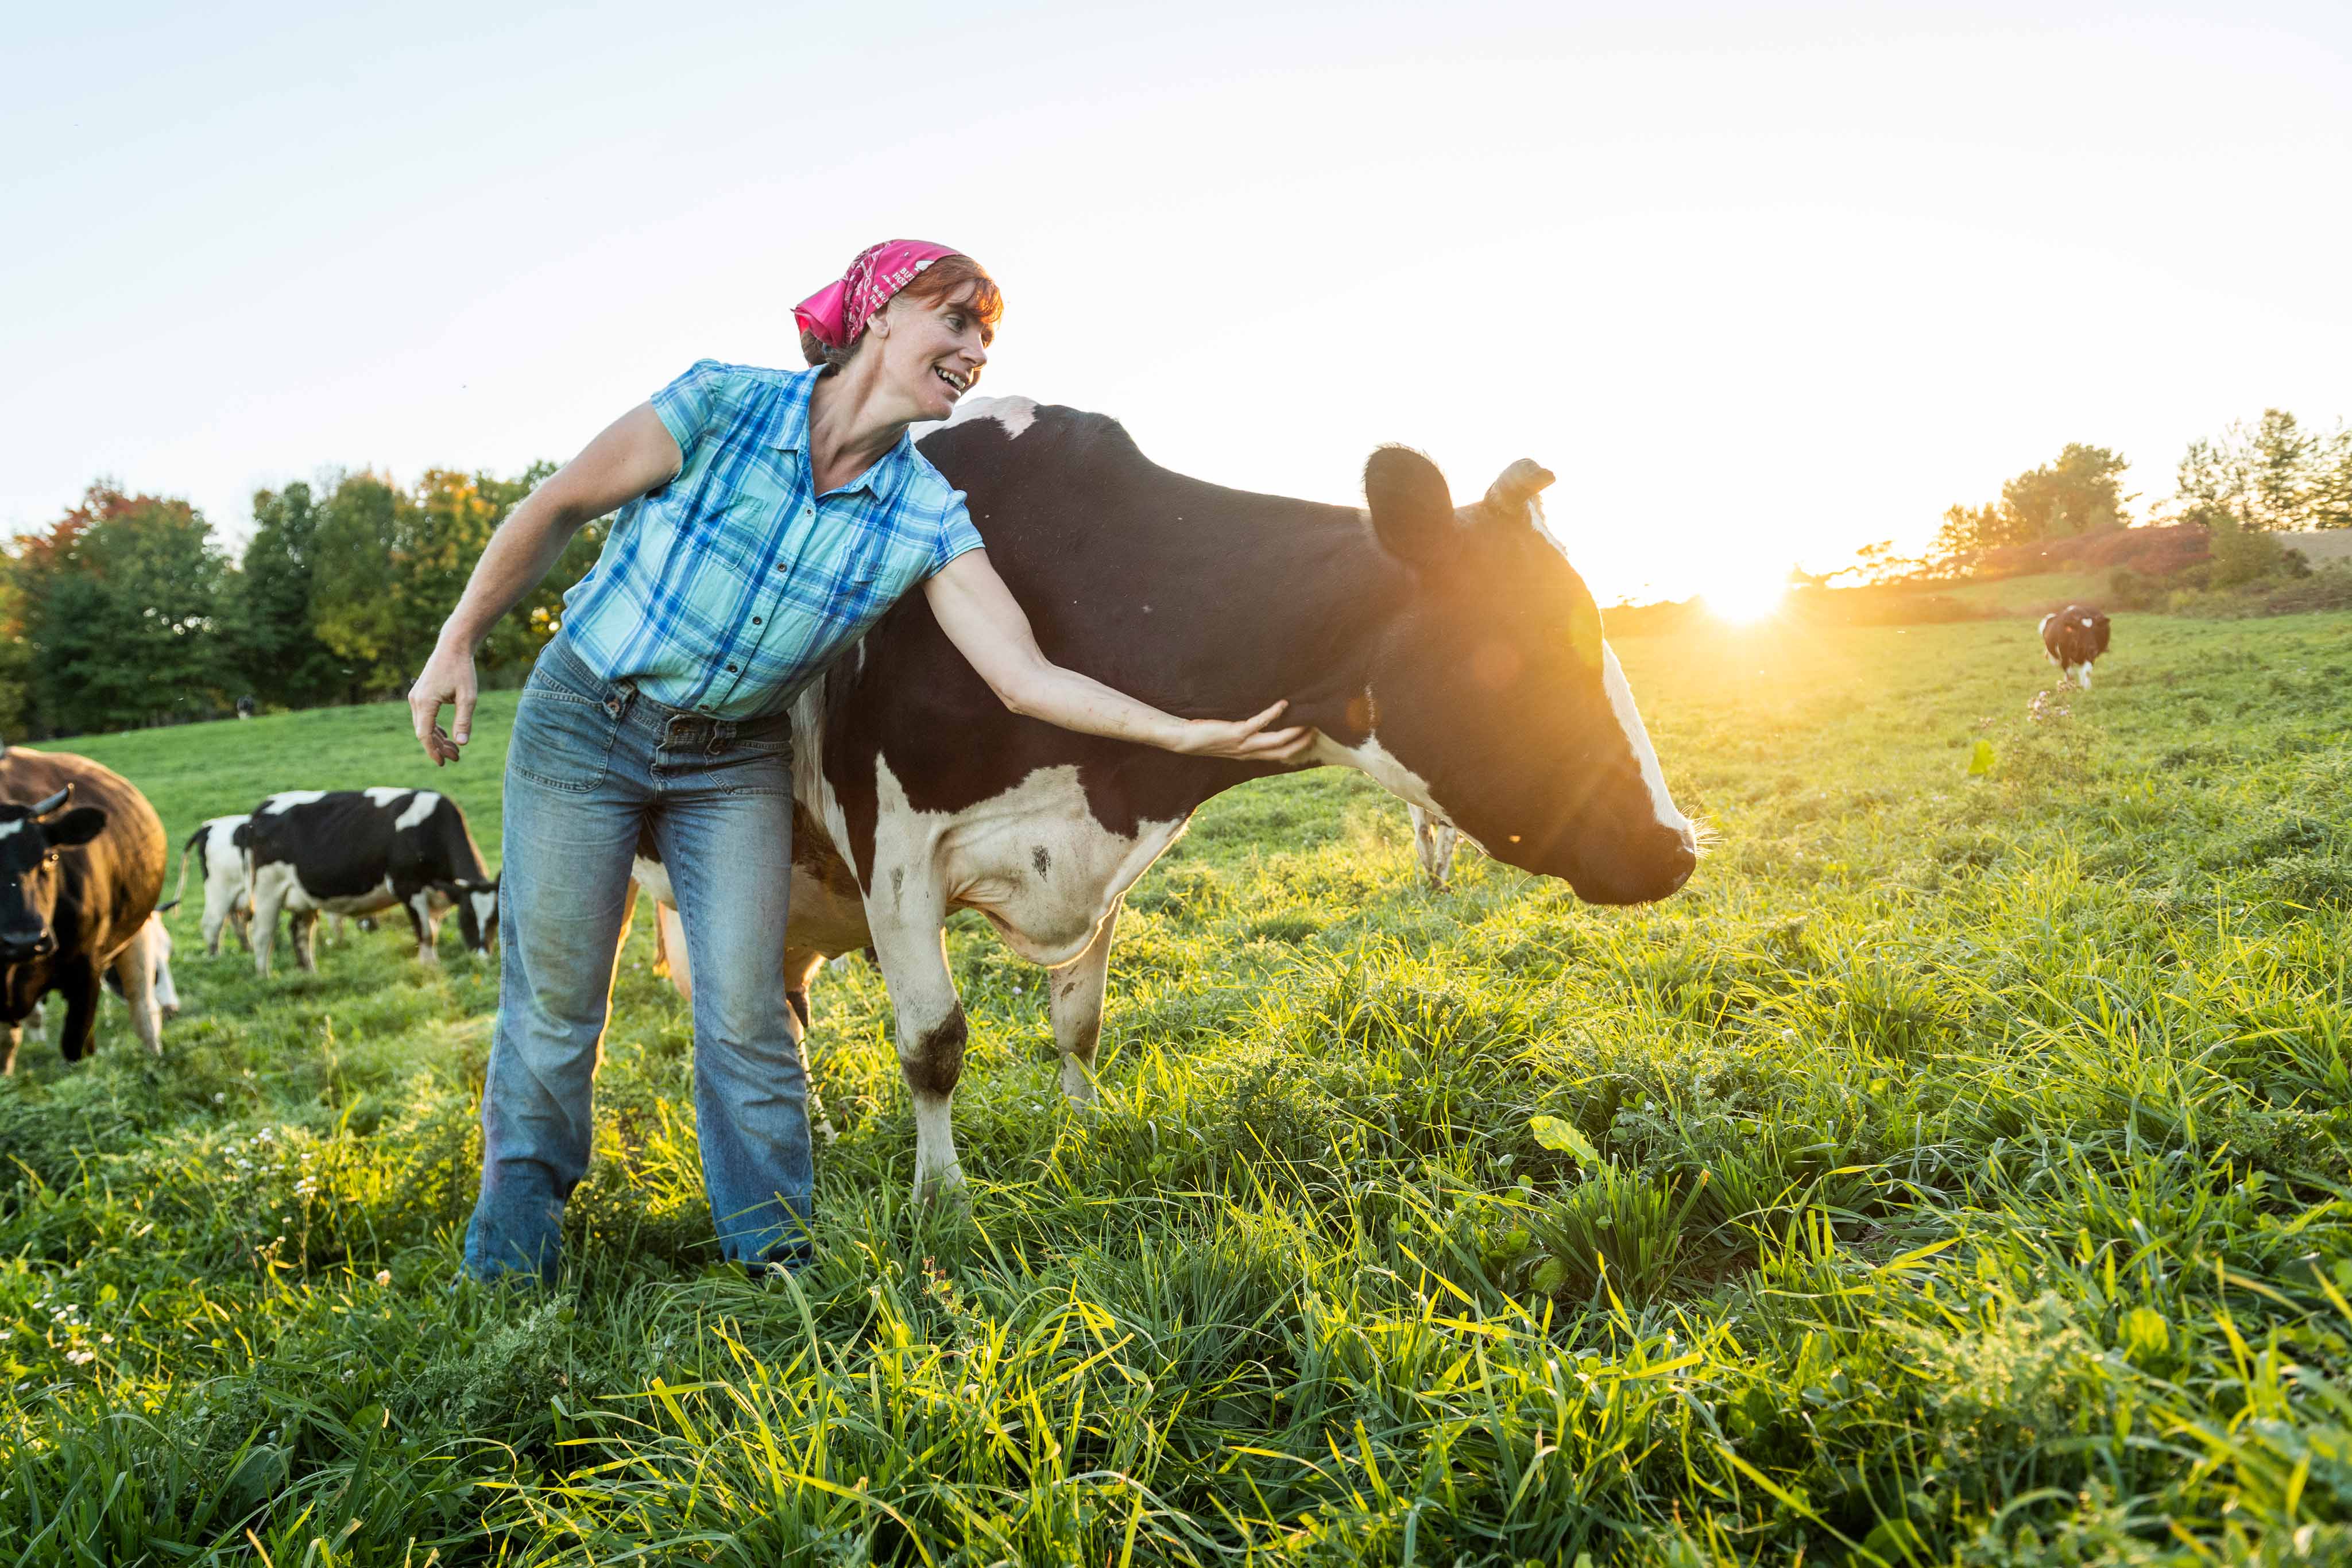 Woman petting a cow on a big grass field.